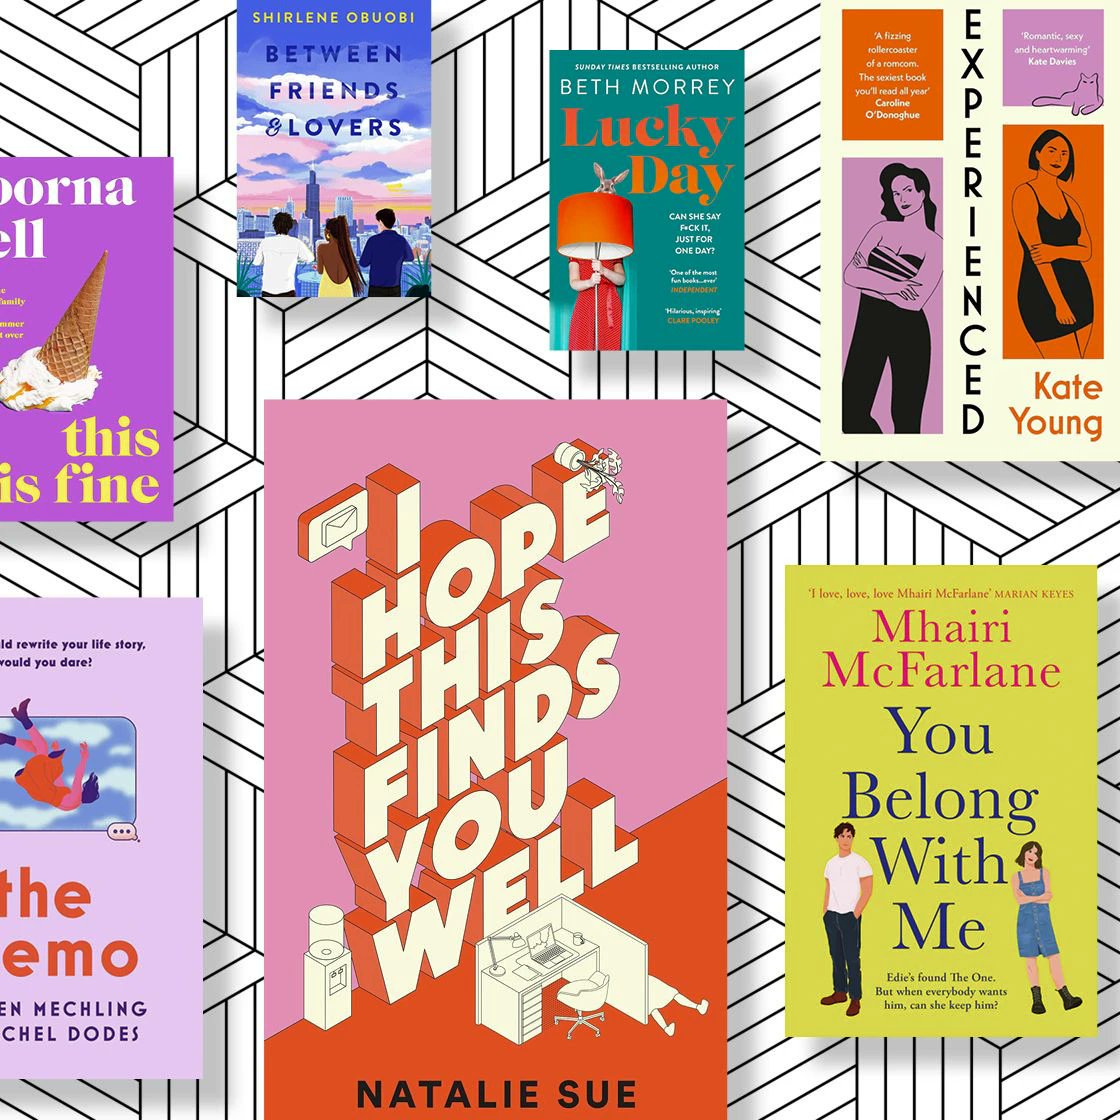 The perfect Bank Holiday #books #trend ft insight from @JoDickinson36 with @poornabell, @MhairiMcF, @lucy_dillon, @laurenmechling, @theguyliner, @shirleneobuobi, @natwrotewhat, @BethMorrey, @kateyoungwrites and @NotRollergirl - enjoy! stylist.co.uk/books/fiction-…